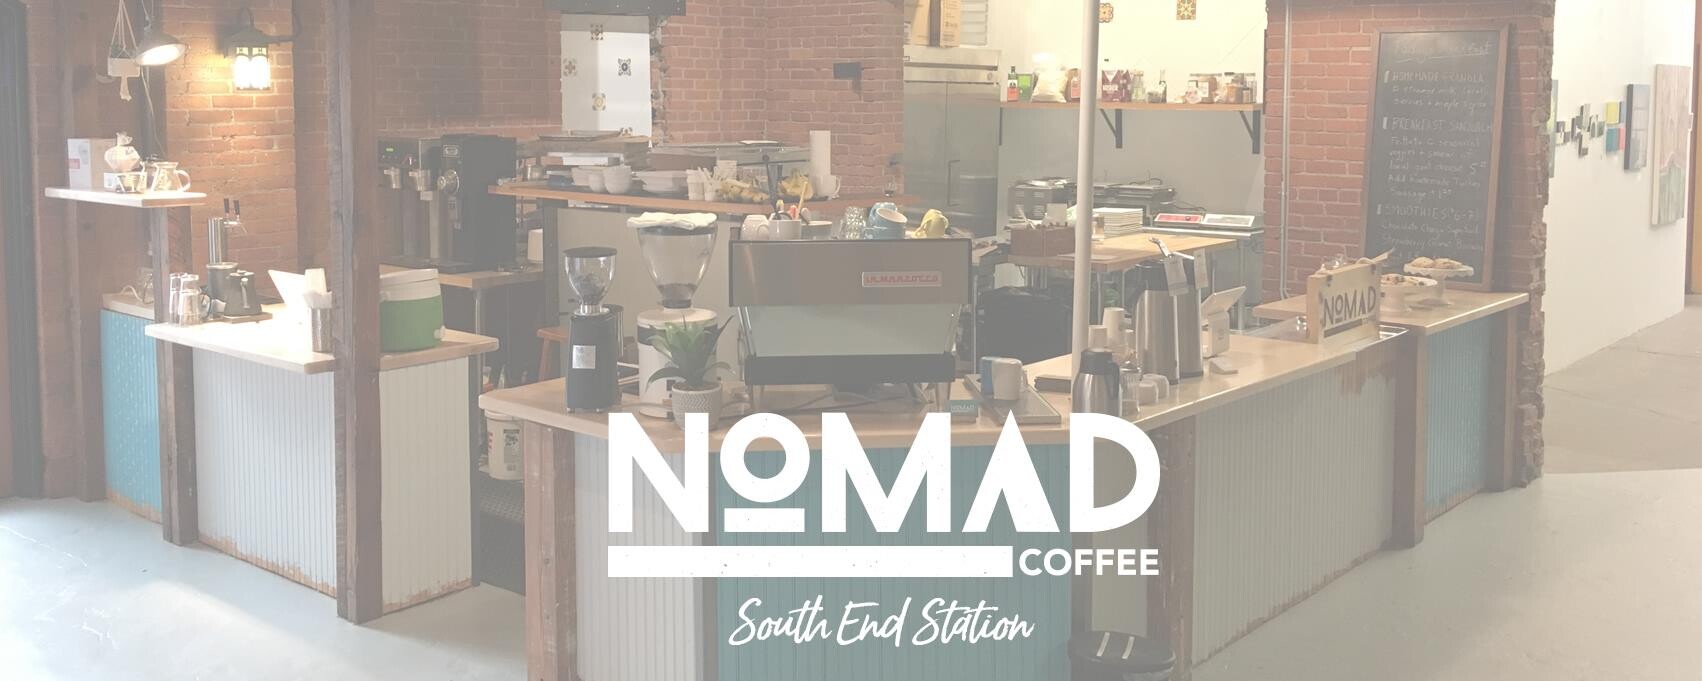 Nomad Coffee (South End Station)